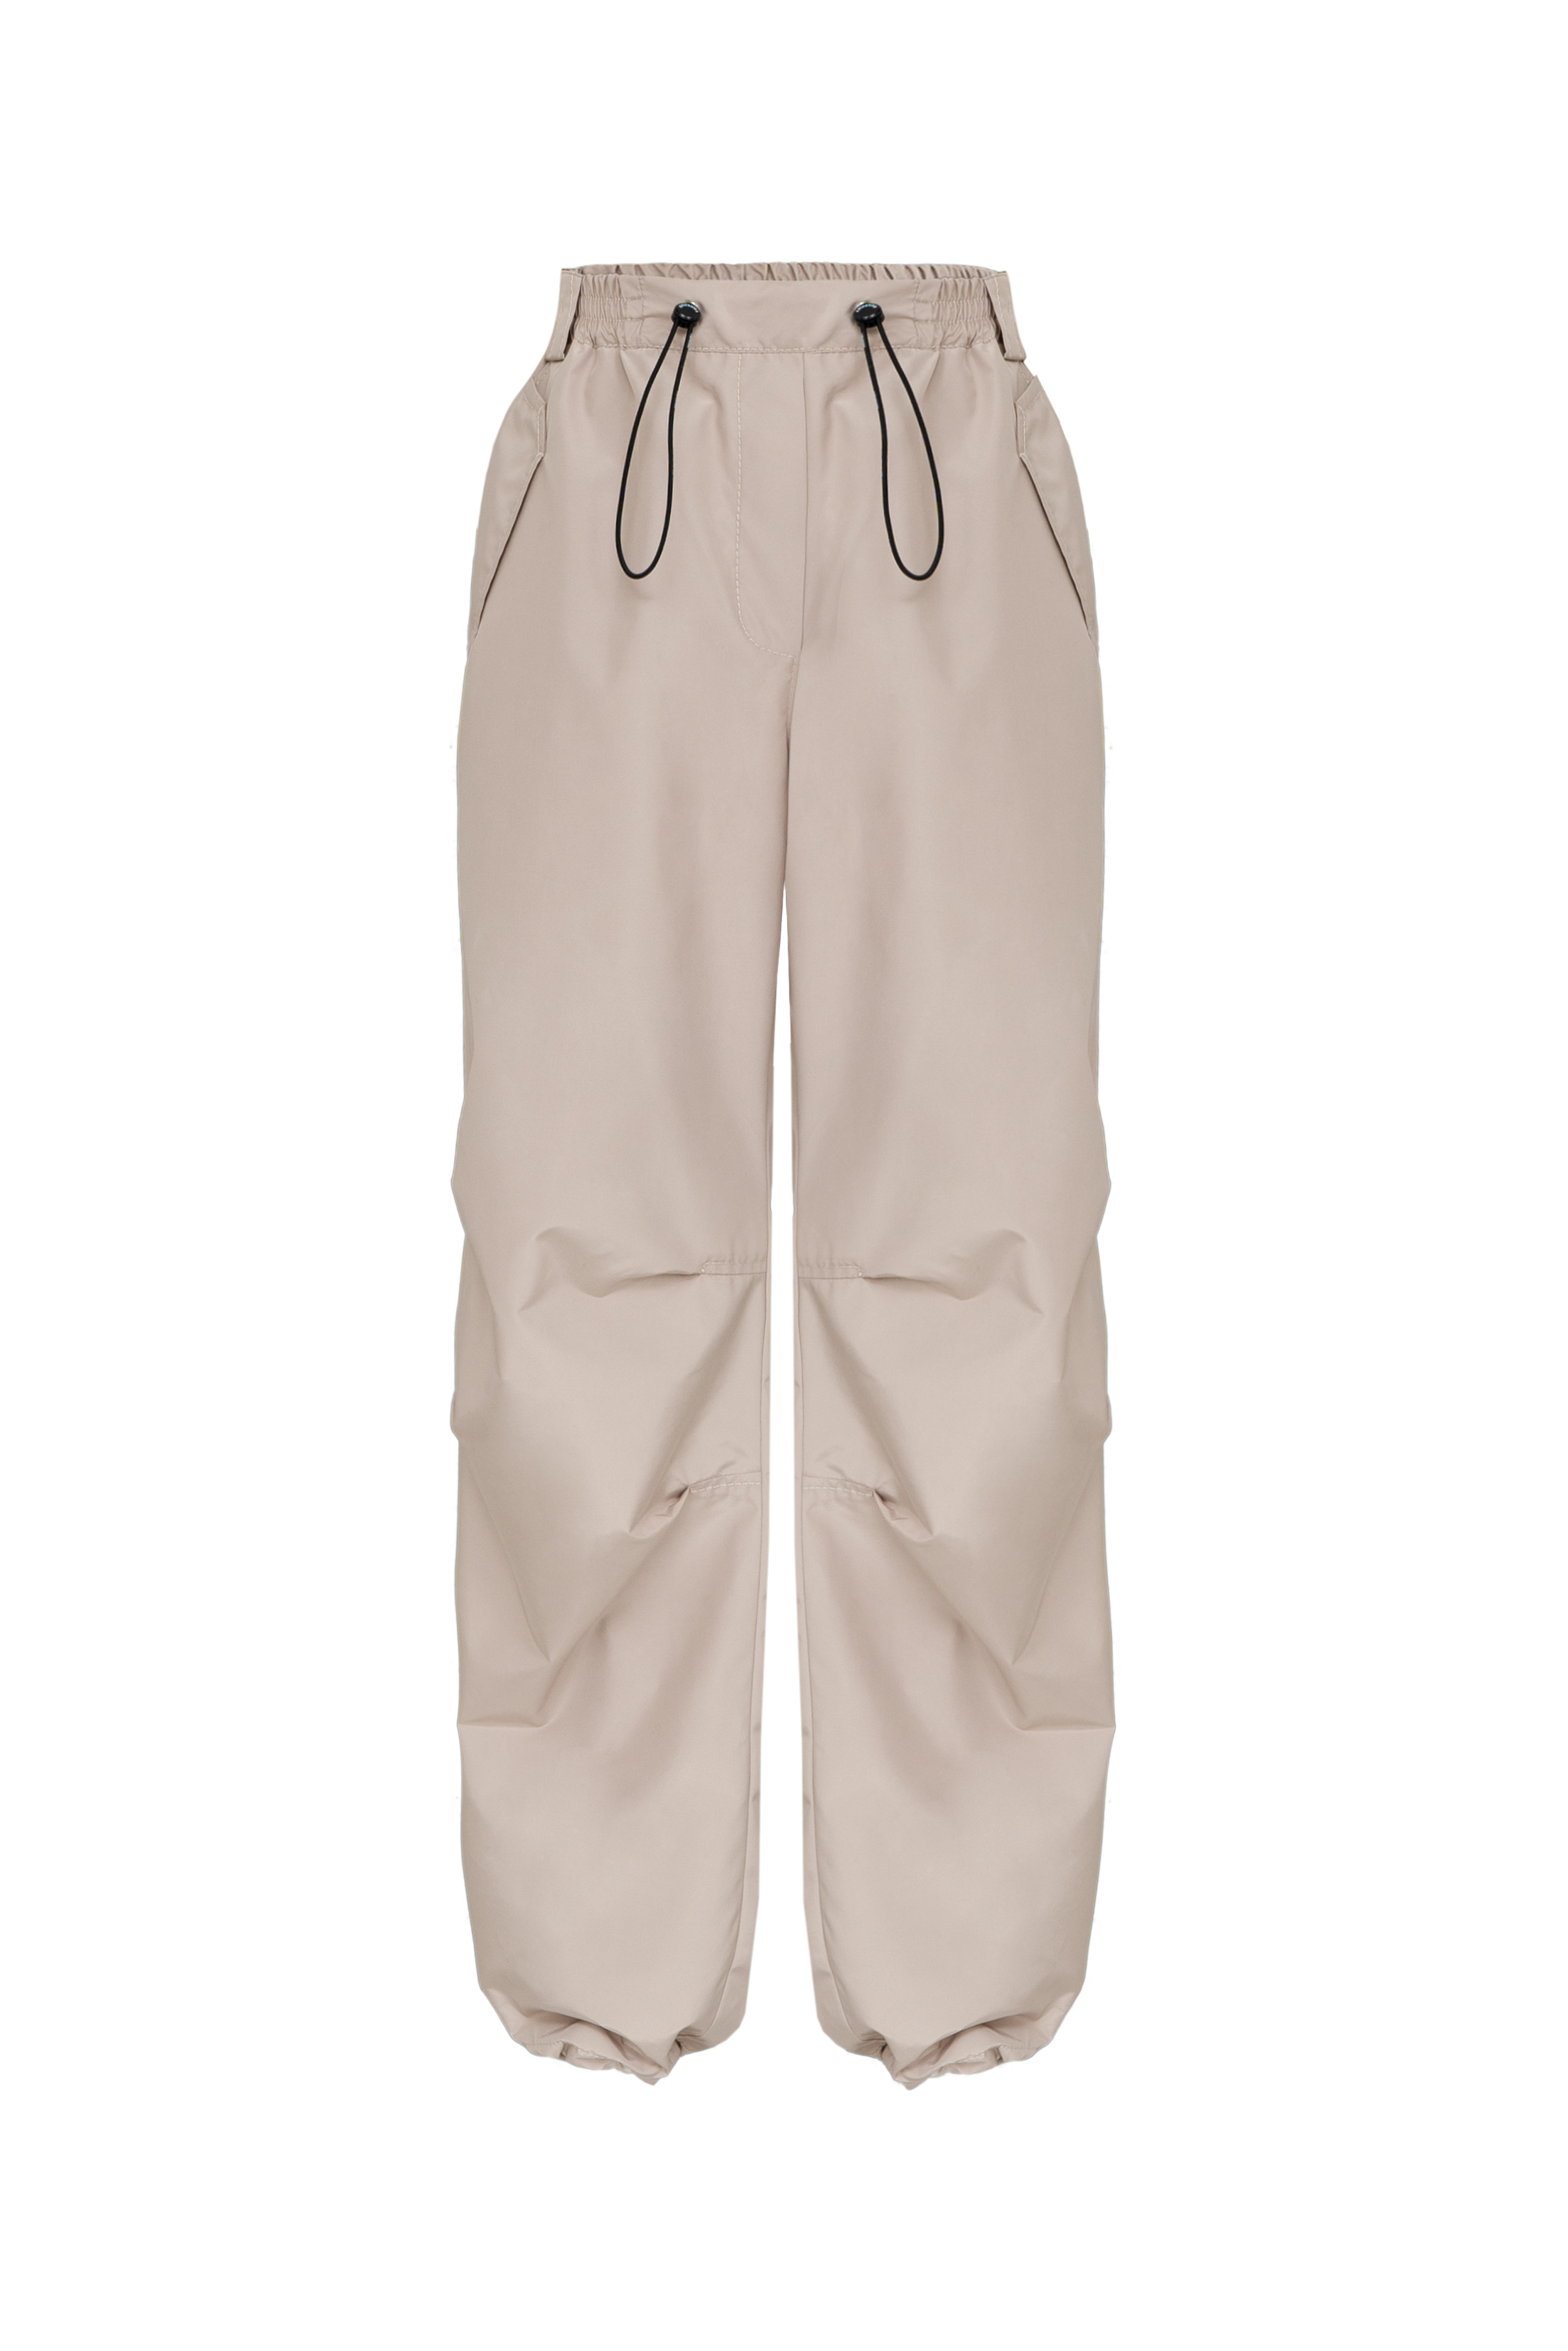 Trousers 4748-03 beige from BRUSNiKA